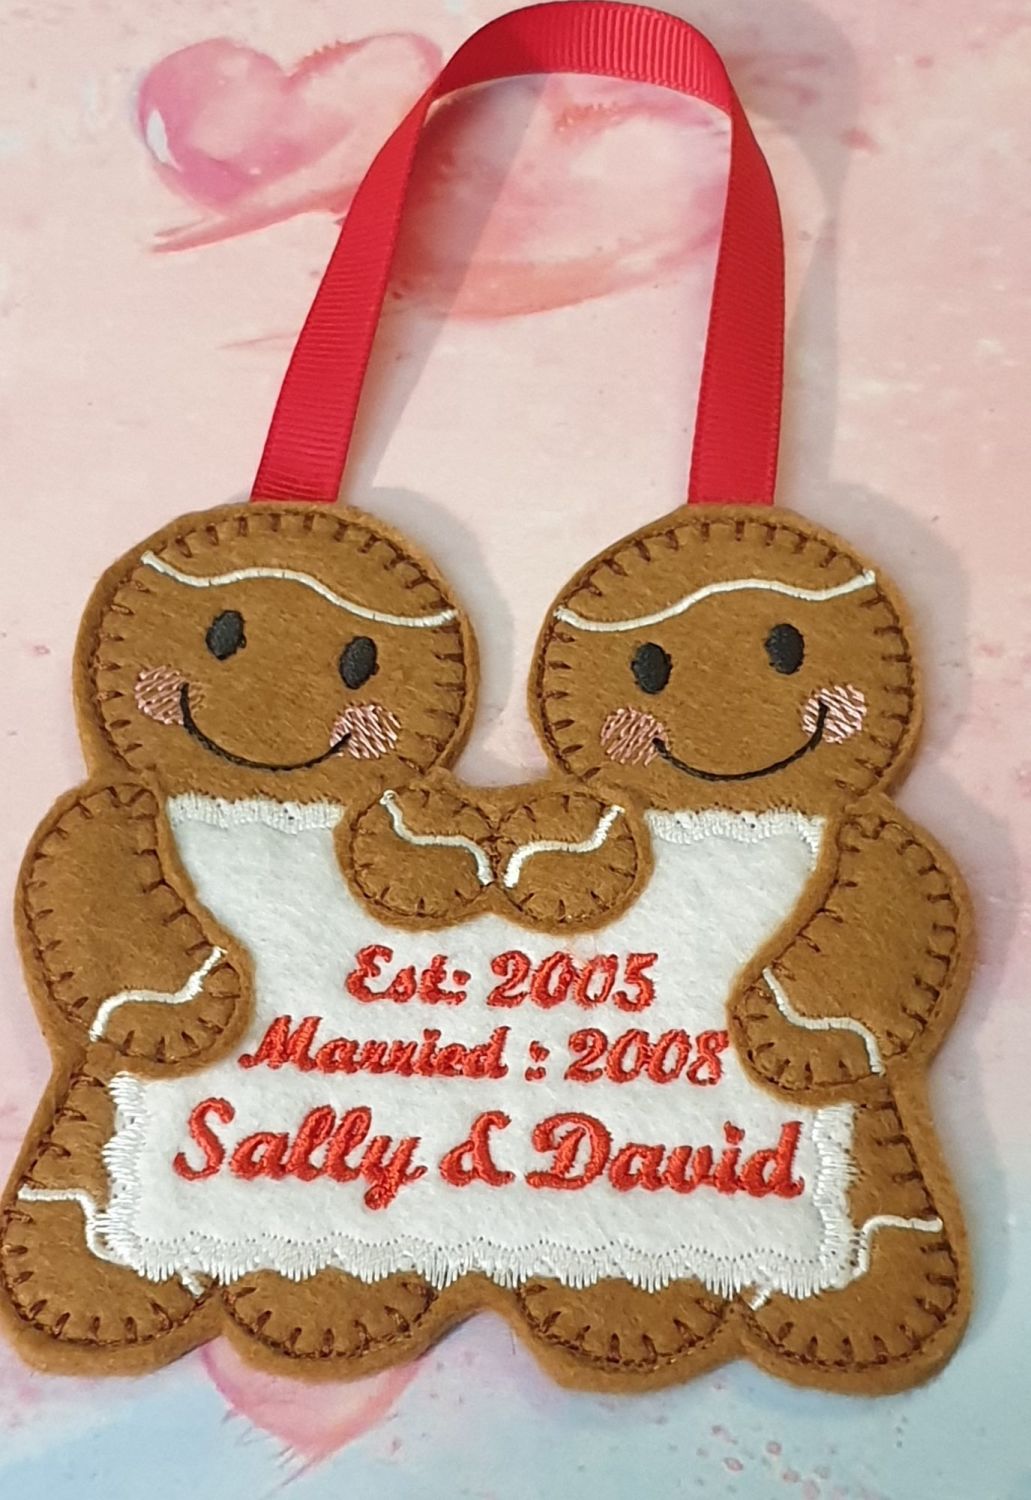  Couple Gingerbread holding message